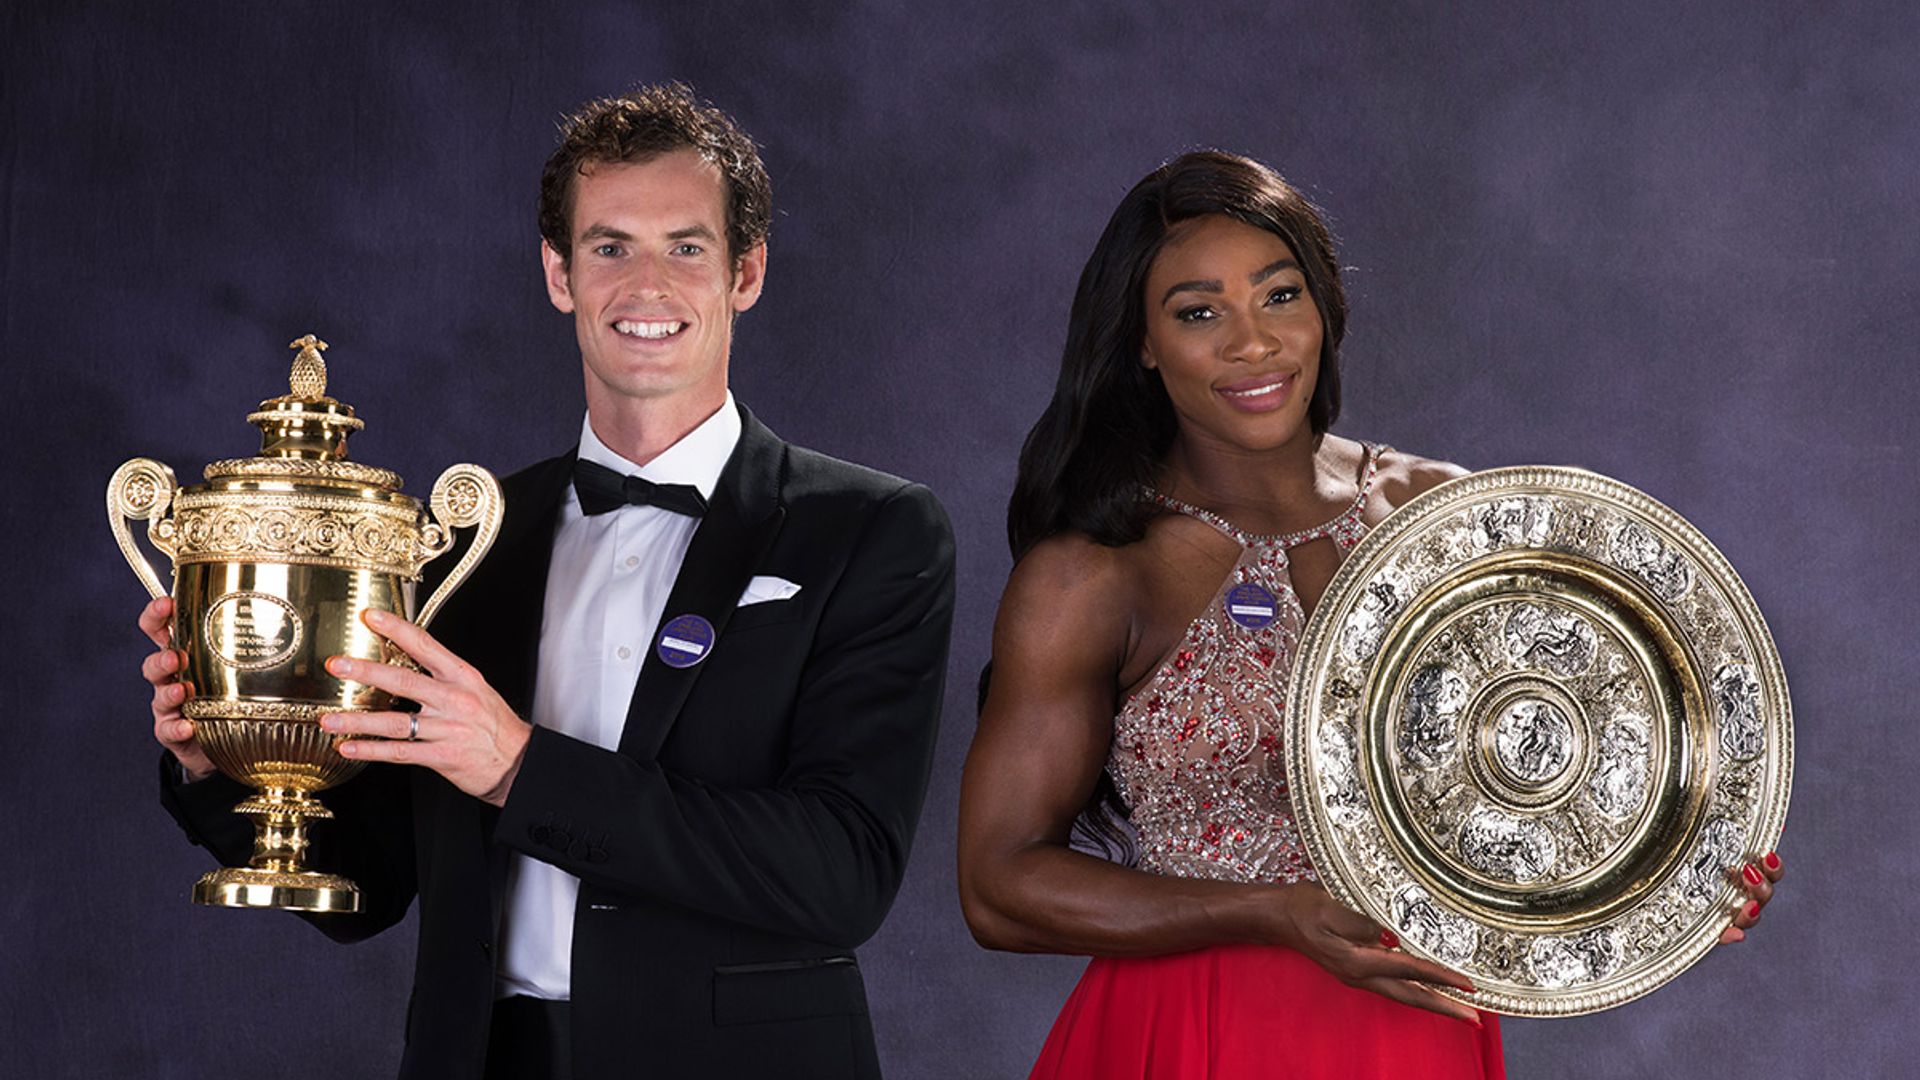 Andy Murray will partner up with Serena Williams in Wimbledon mixed doubles